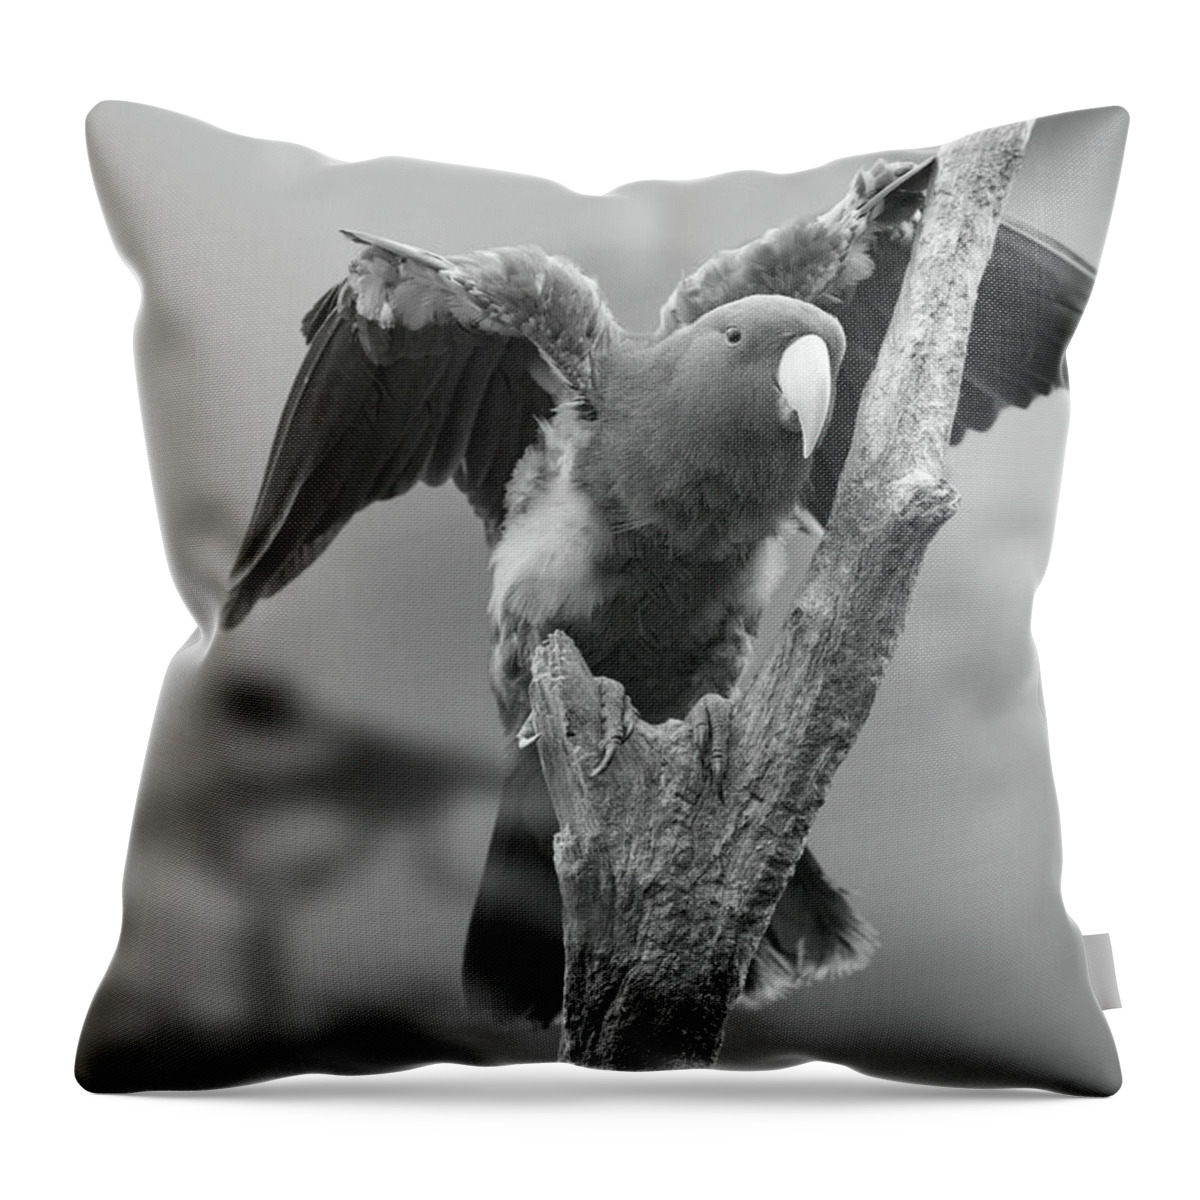 Disk1215 Throw Pillow featuring the photograph Eclectus Parrot Singapore by Tim Fitzharris